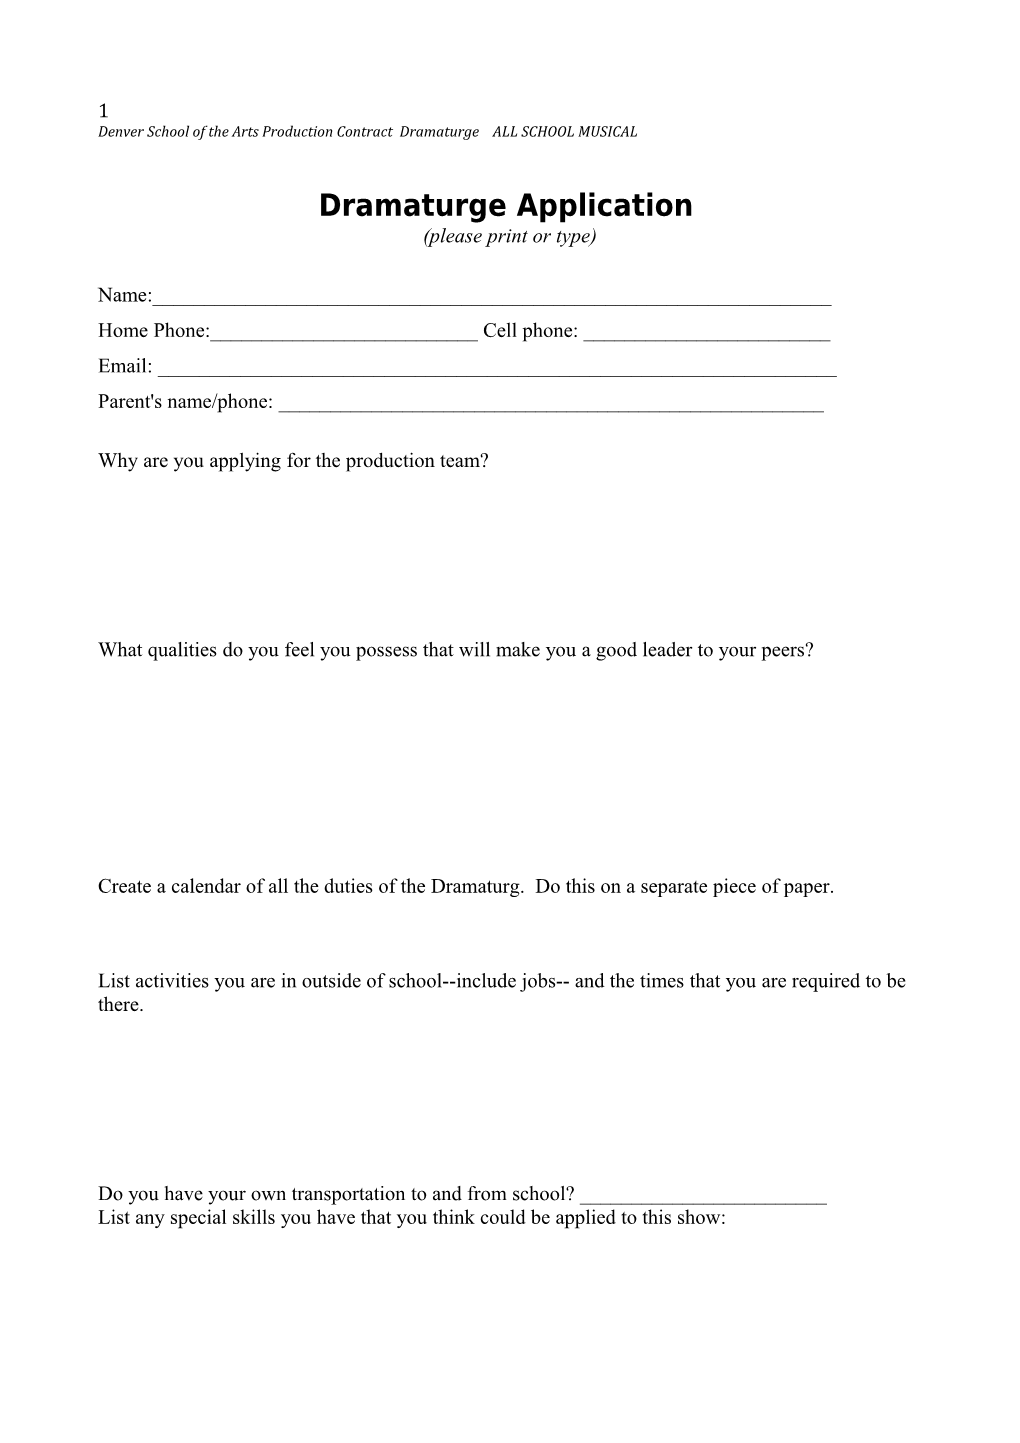 Denver School of the Arts Production Contract Dramaturge ALL SCHOOL MUSICAL